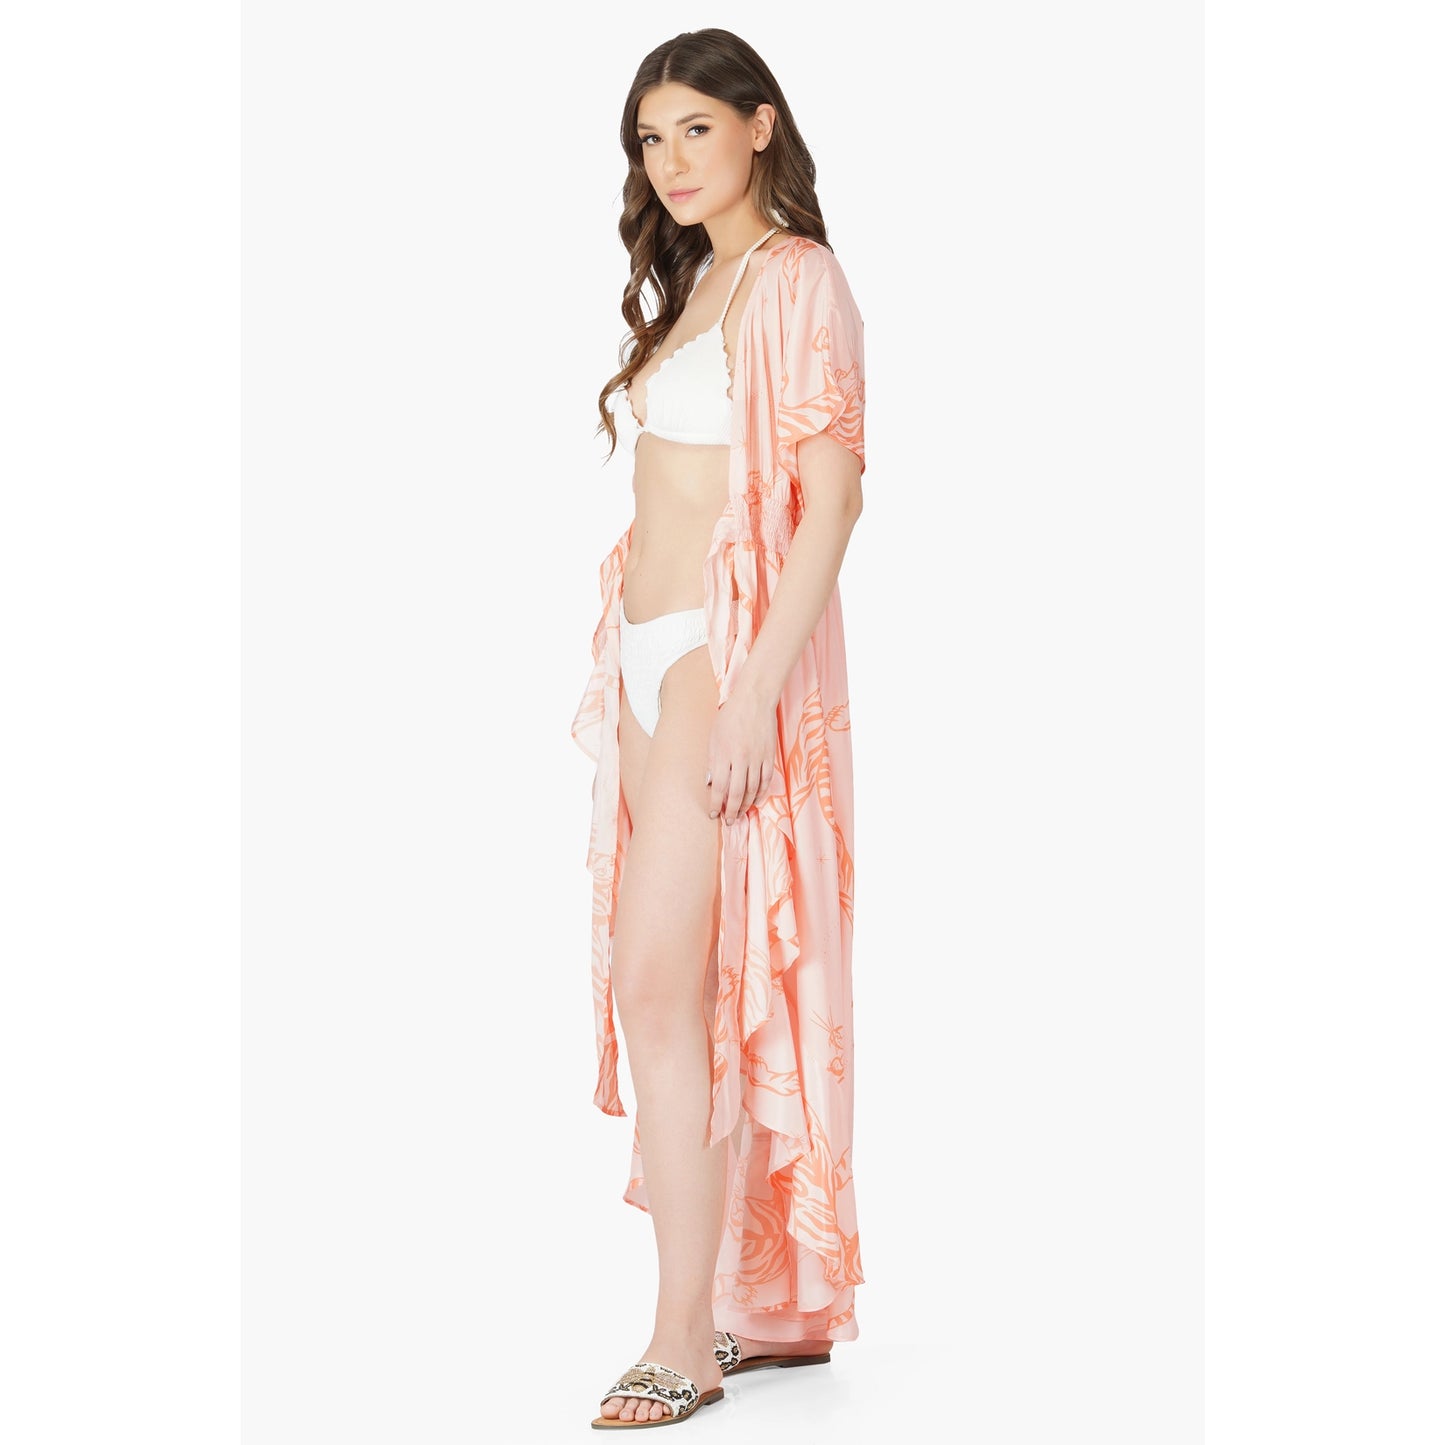 Apricot Wash Tiger Cover UP